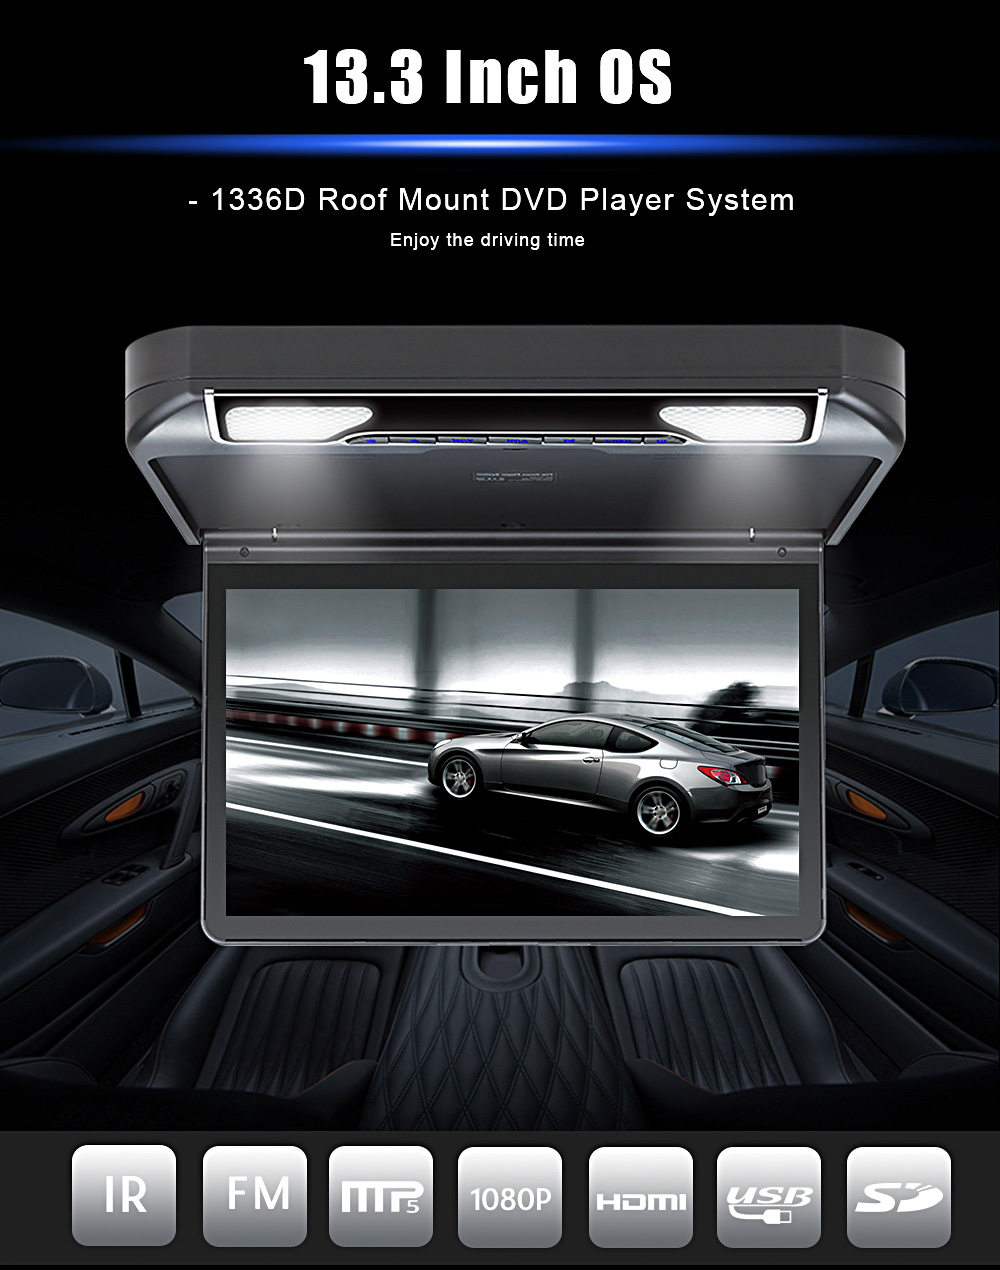 13.3 Inch OS - 1336D Roof Mount DVD Player System with USB IR FM Transmitter